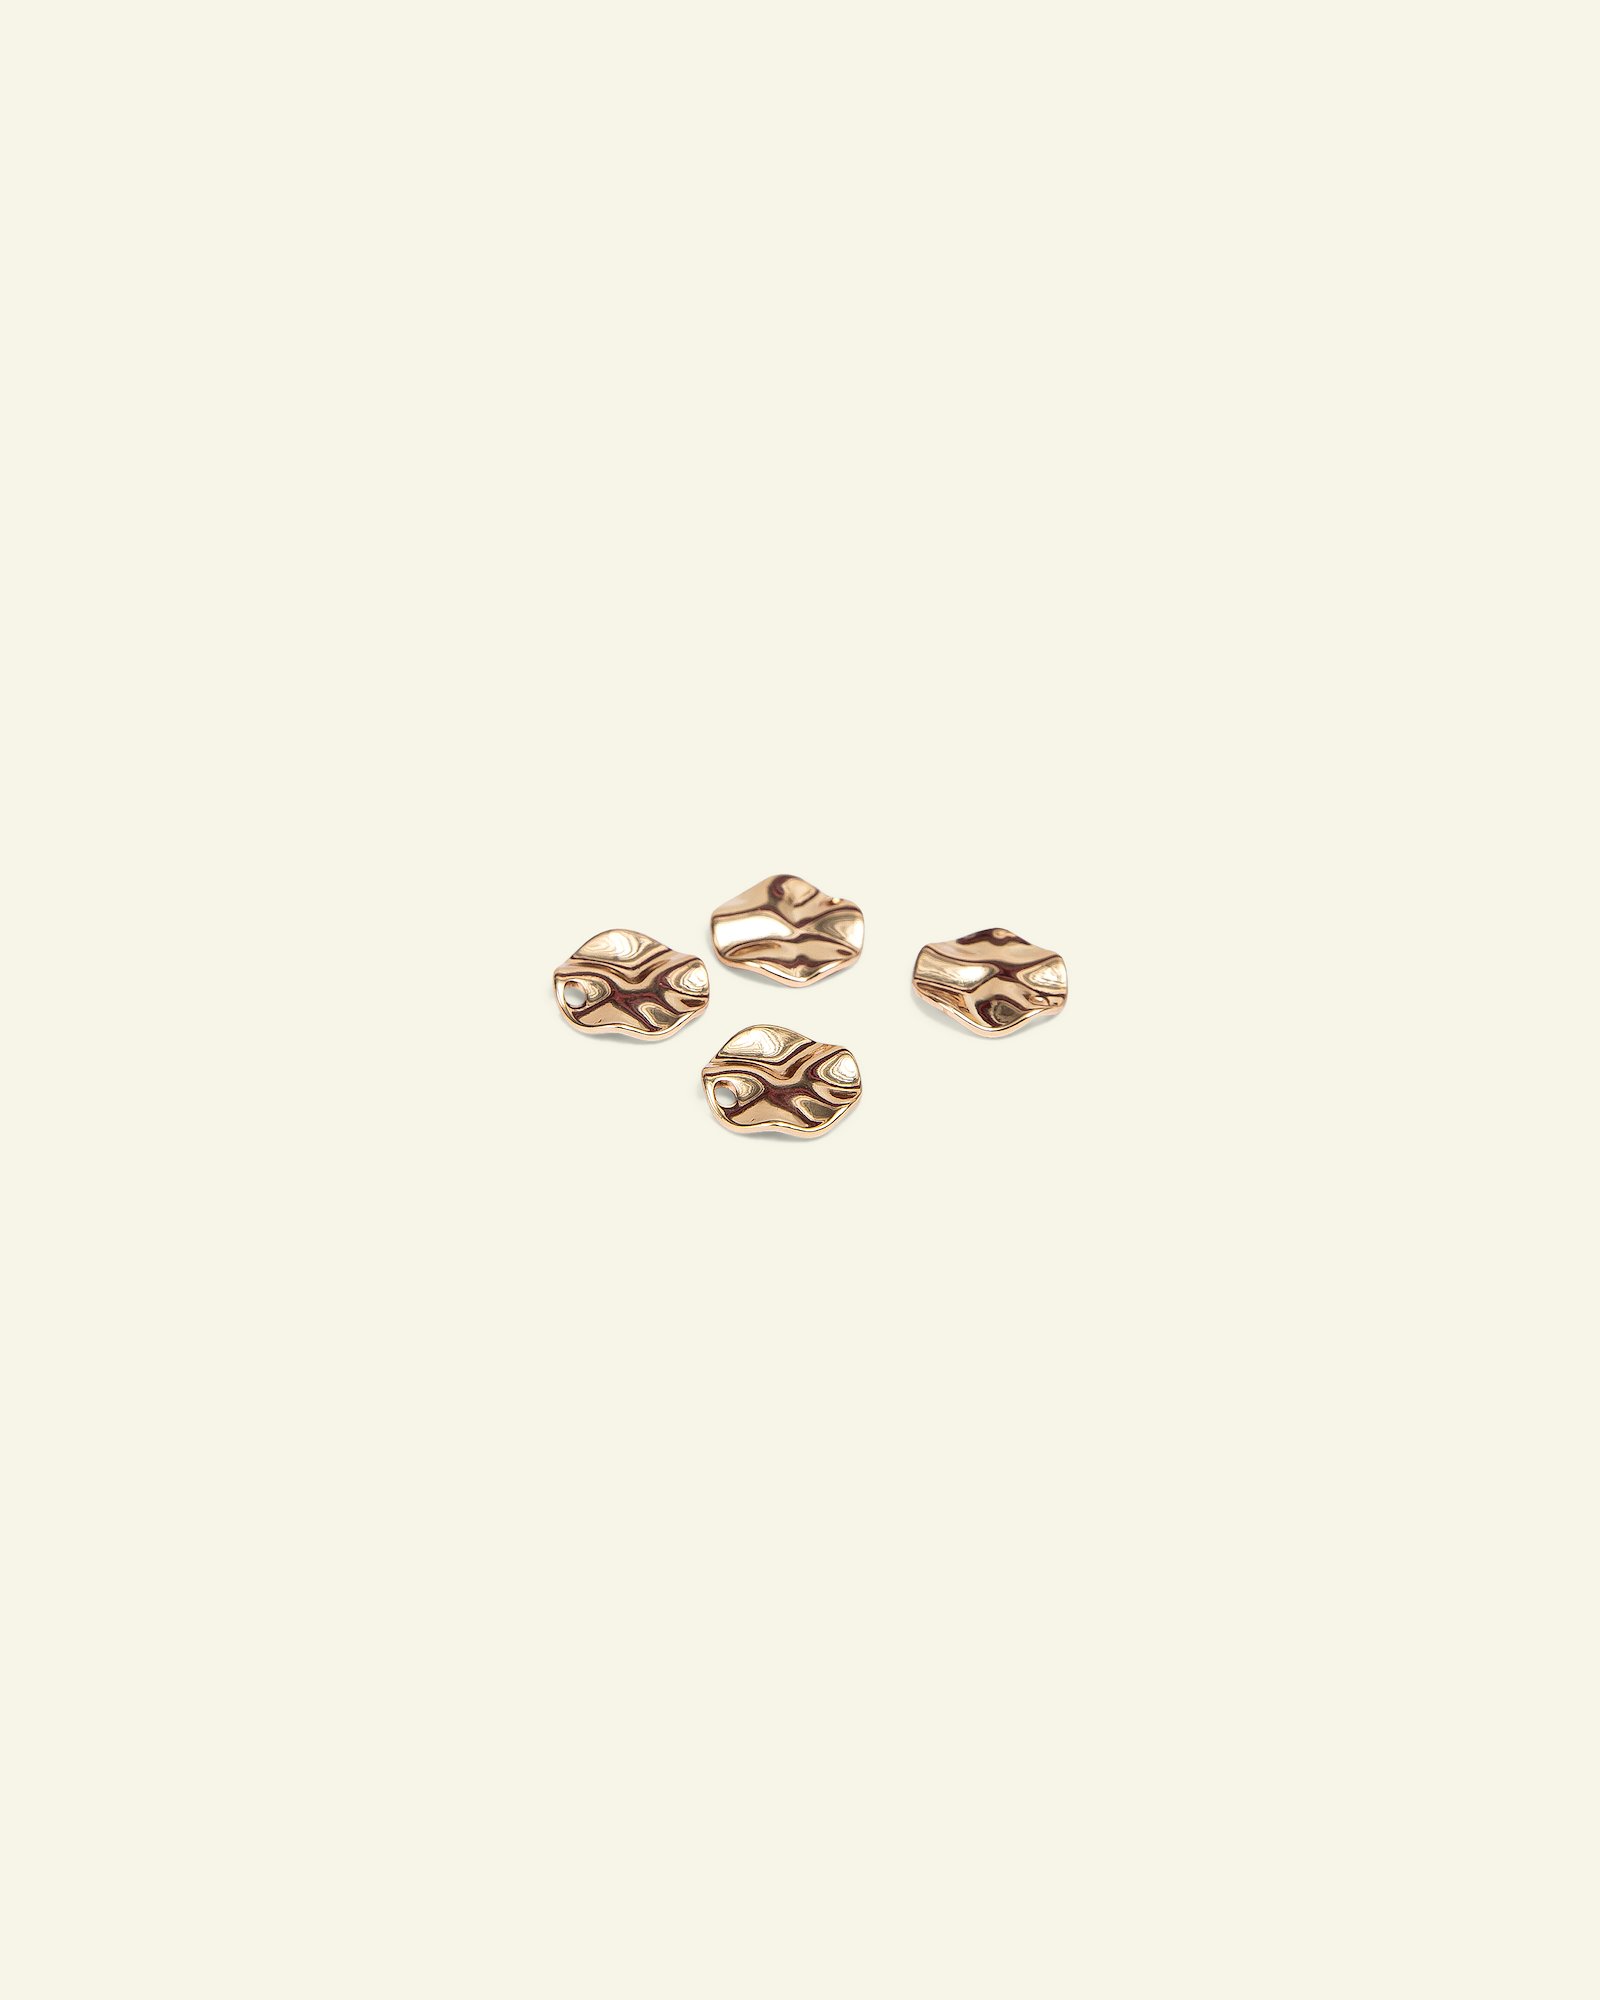 Pendant round 10mm gold colored 4pcs 96228_pack